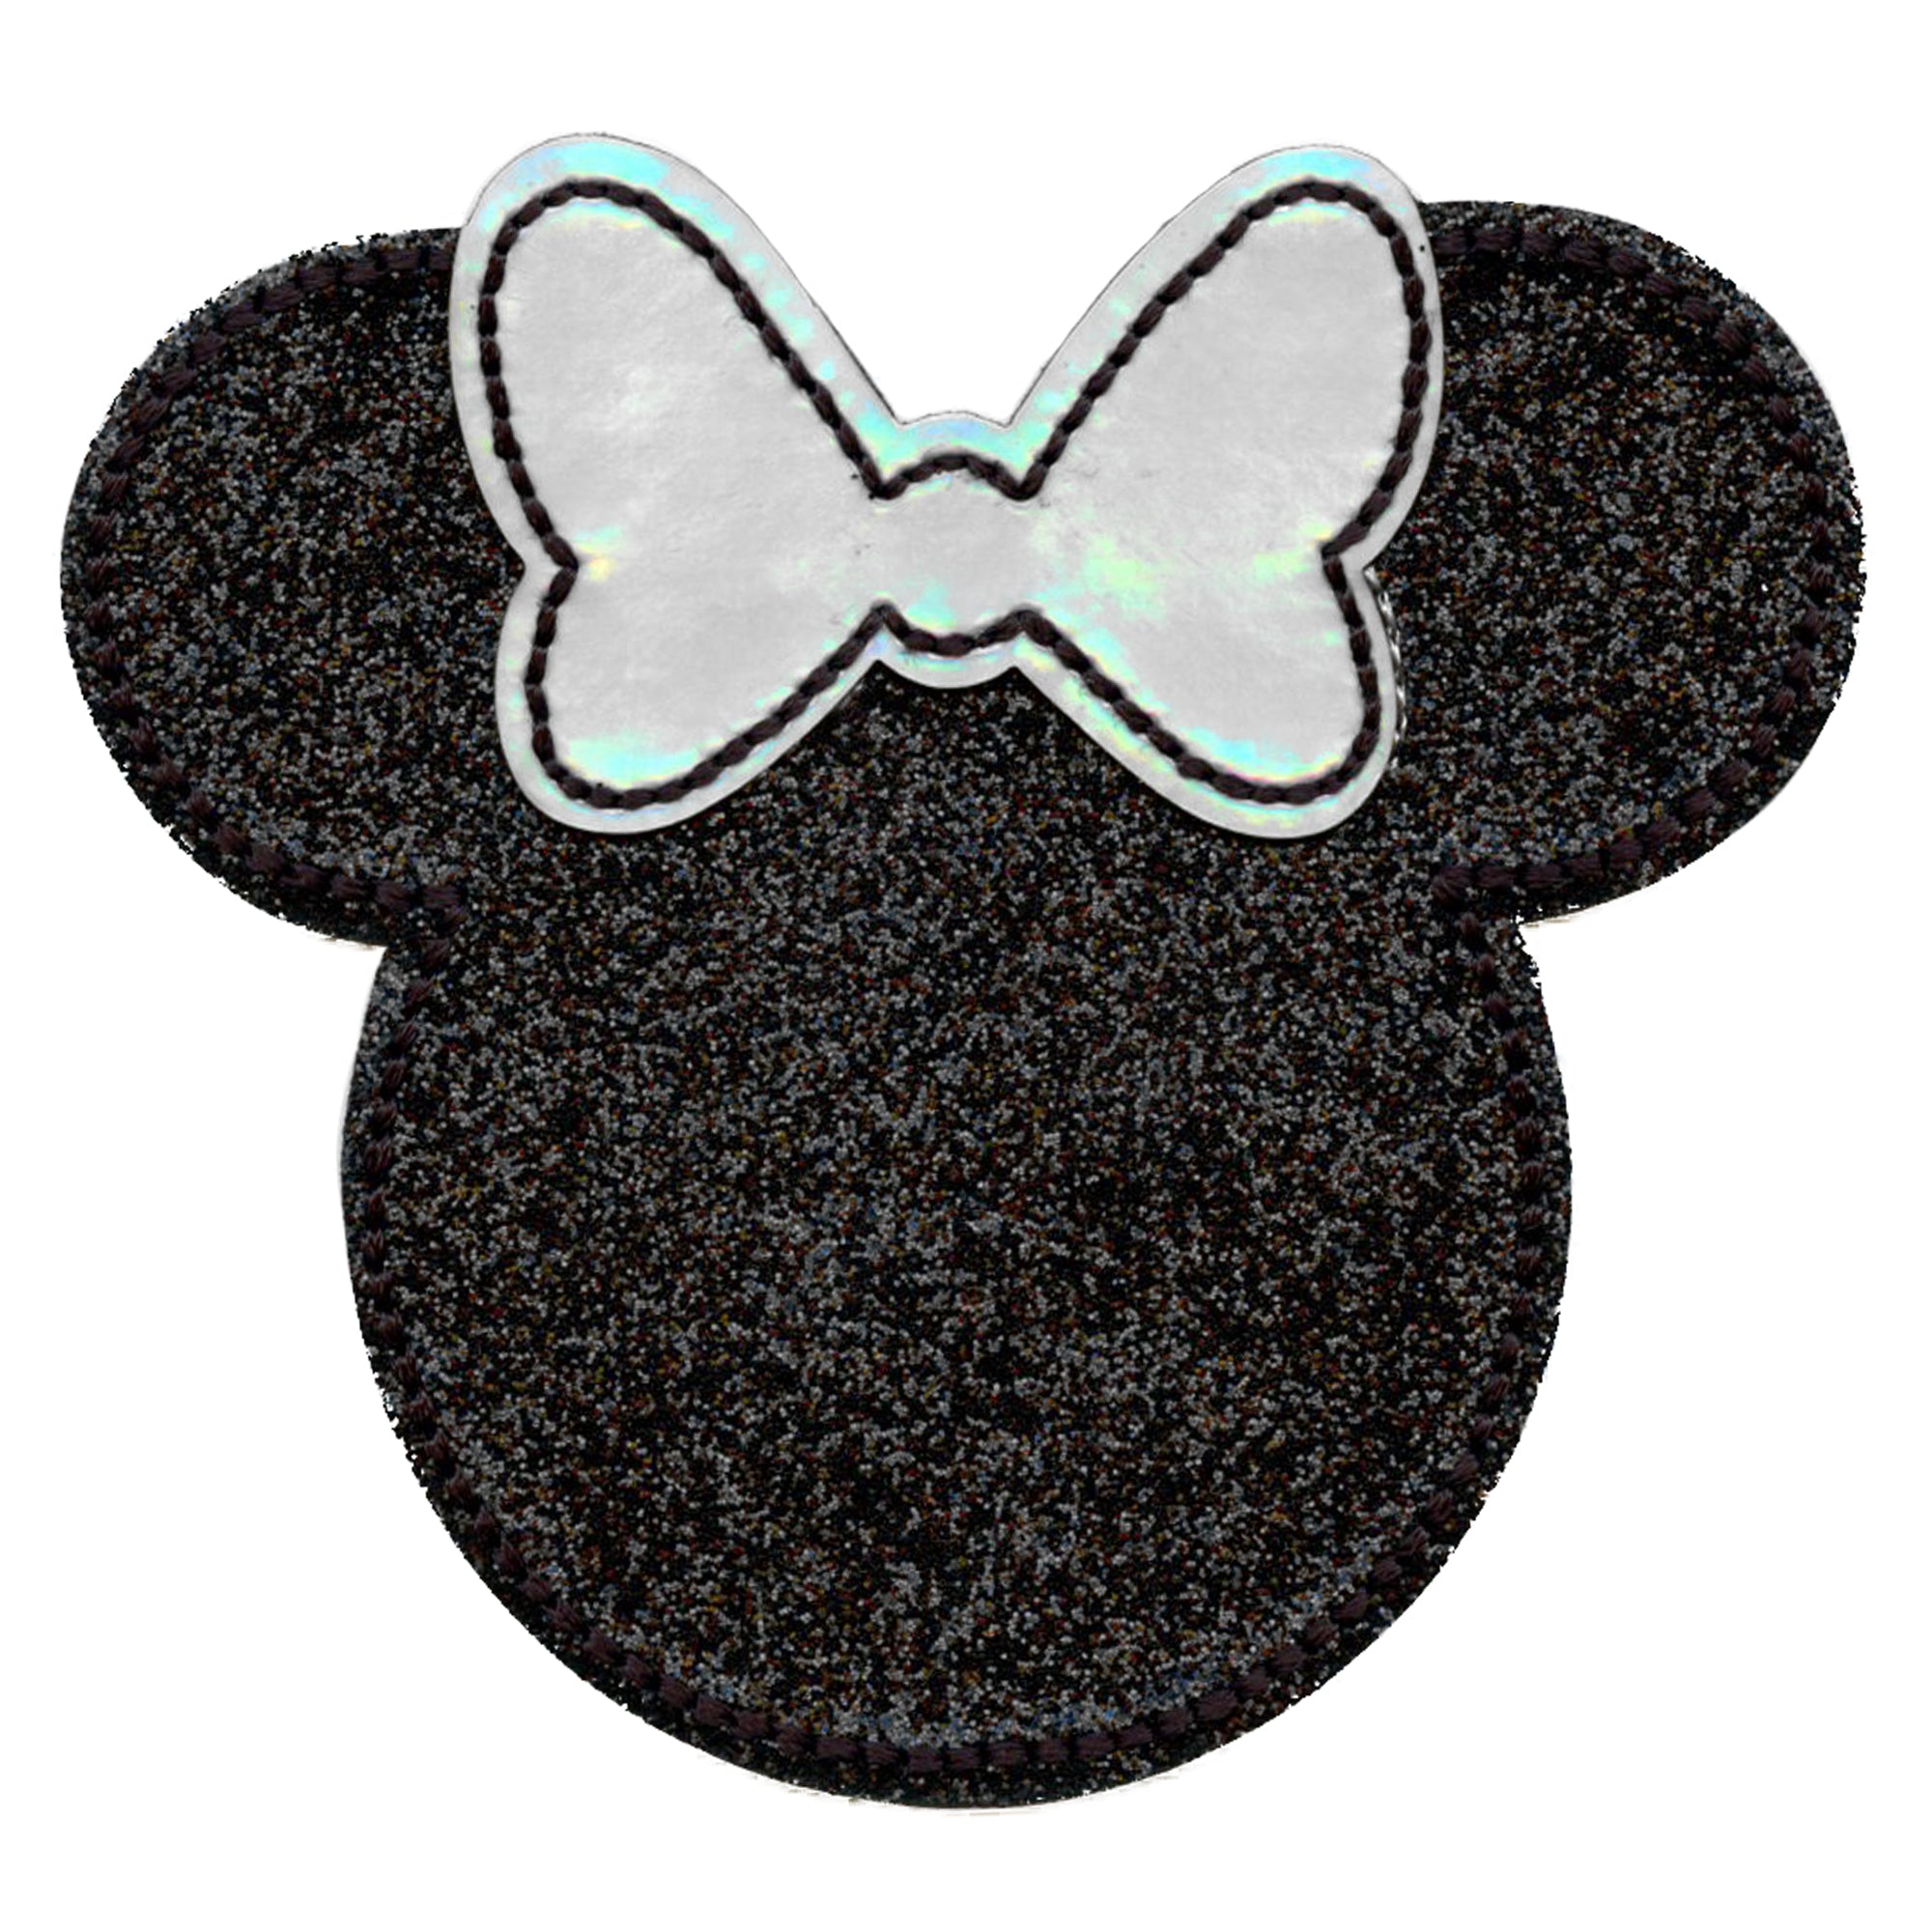 High Quality Gold Glitter Mickey Patch and Minnie Patch. 